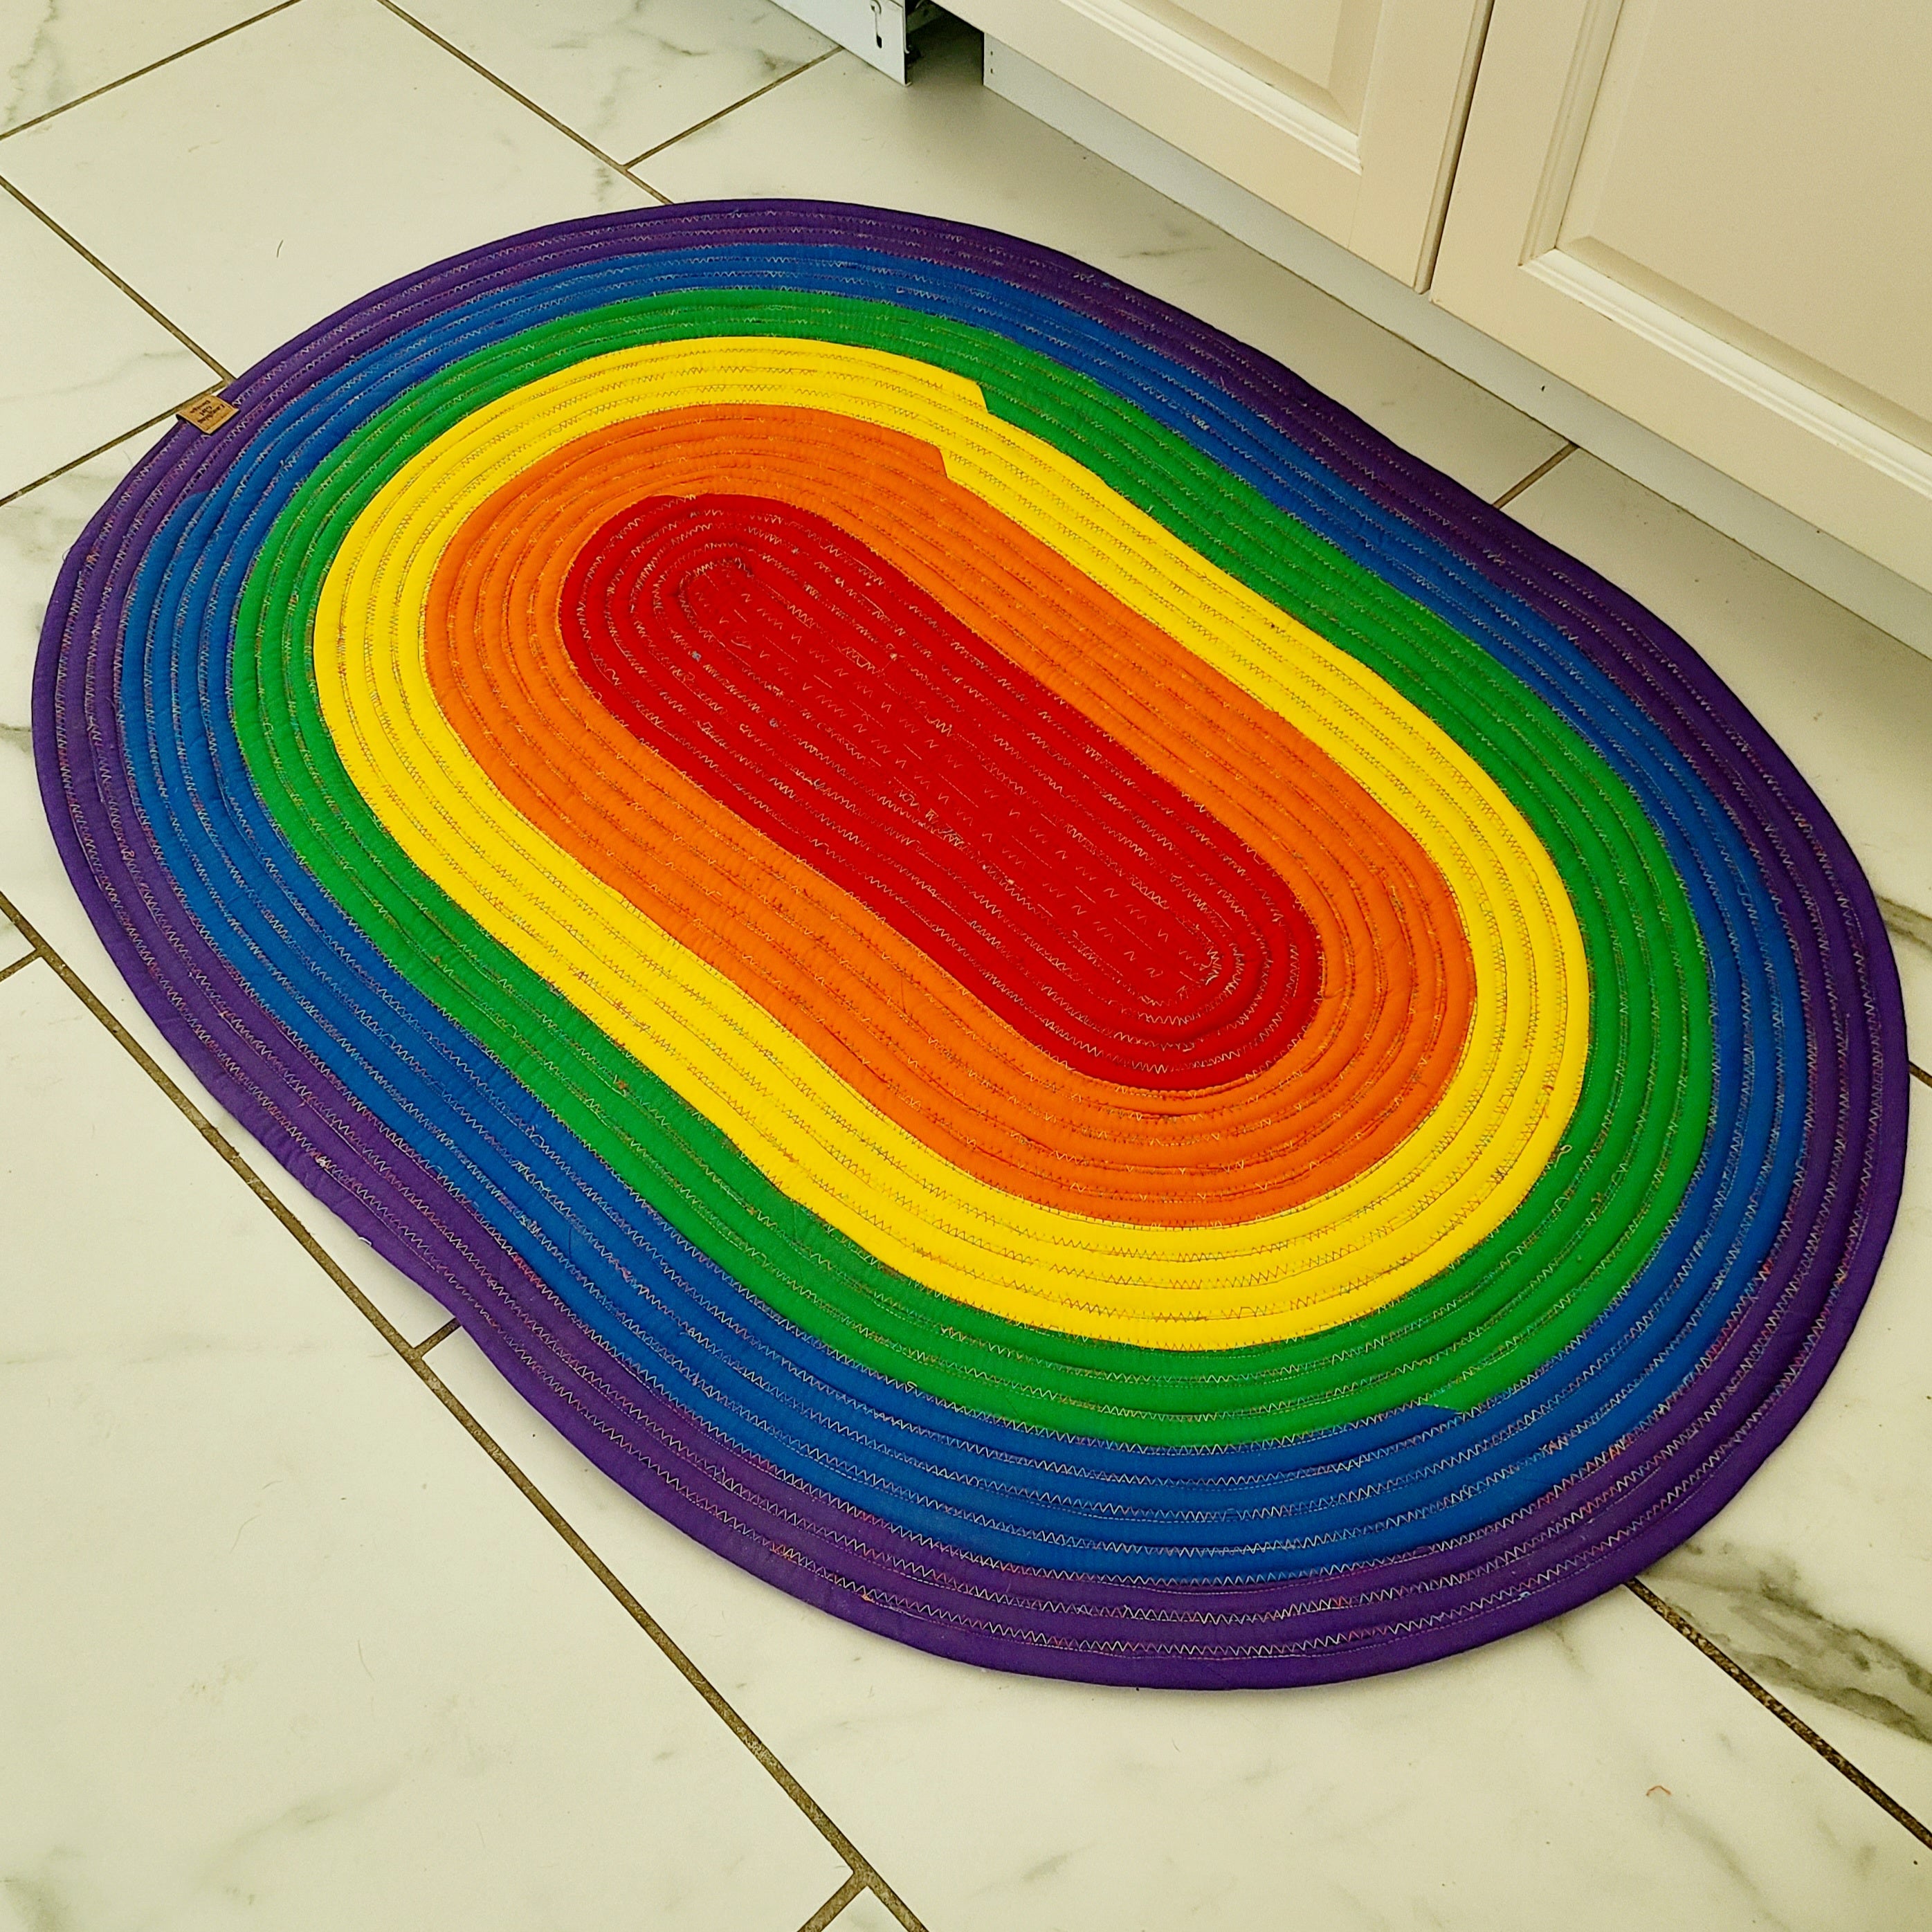 oval rainbow rope rug on white marble with grey veined flooring against white kitchen cabinets base.